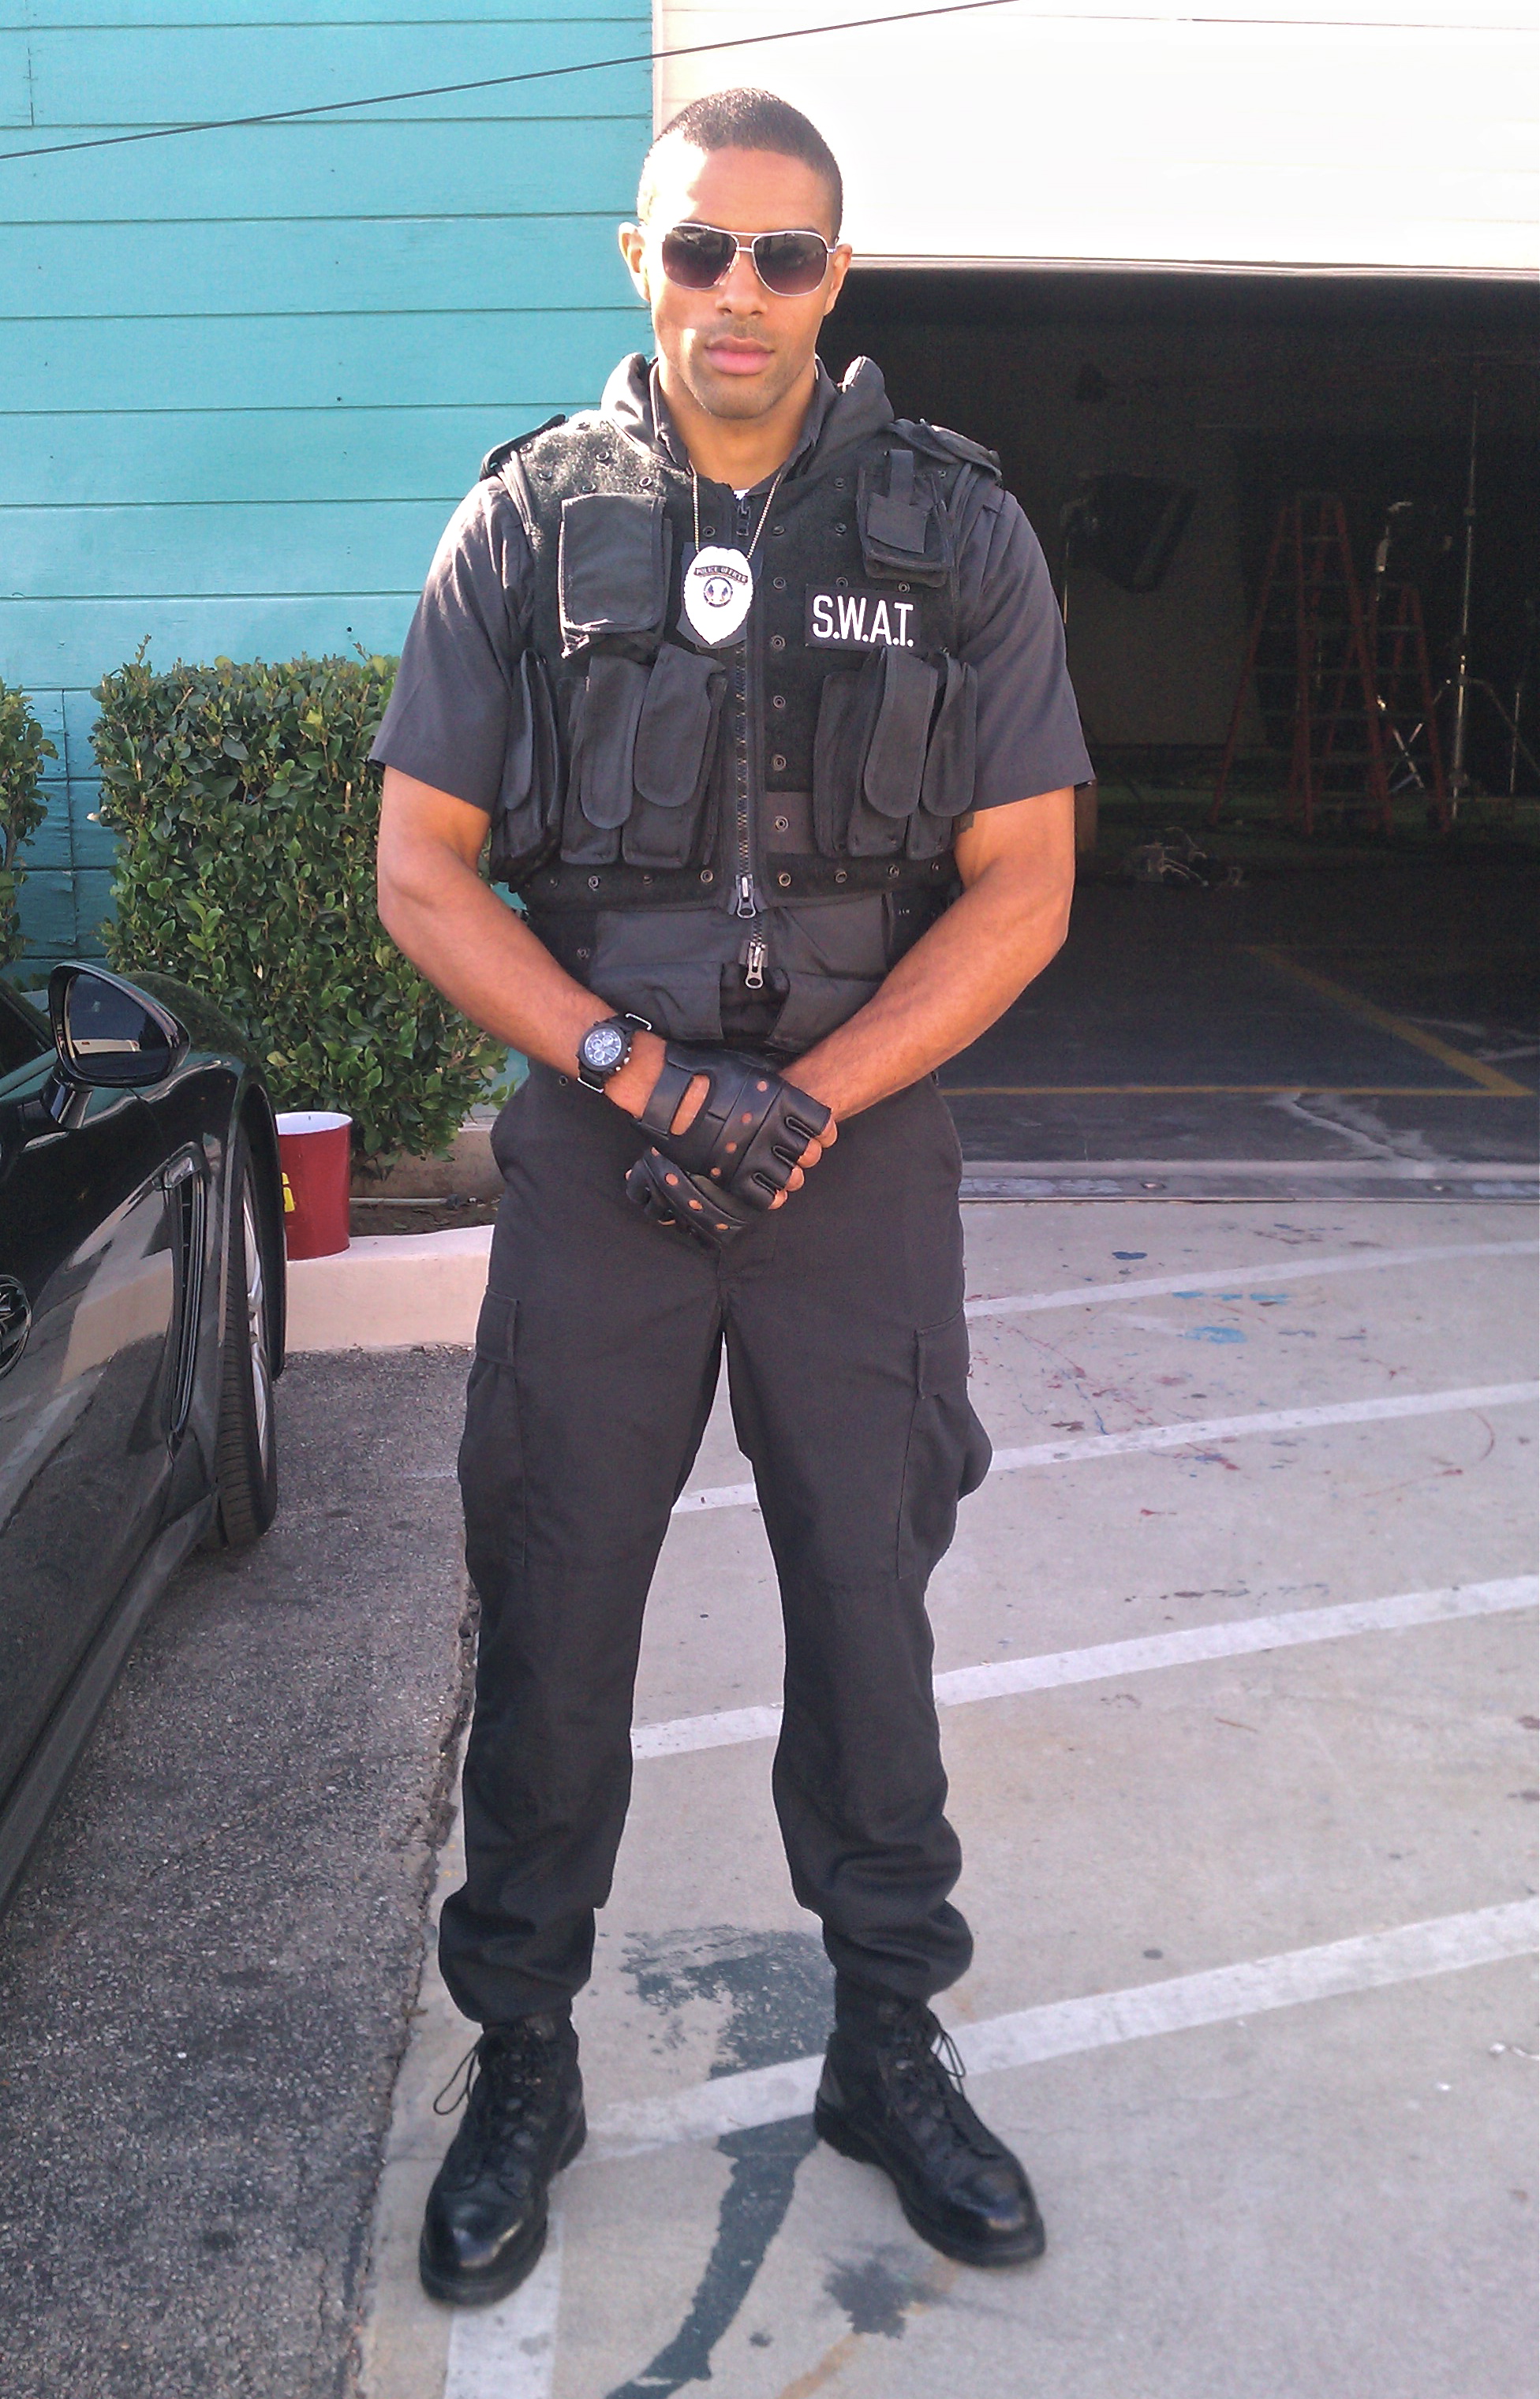 Backstage on set as Cop for Femme Fatale Tour TV Documentary